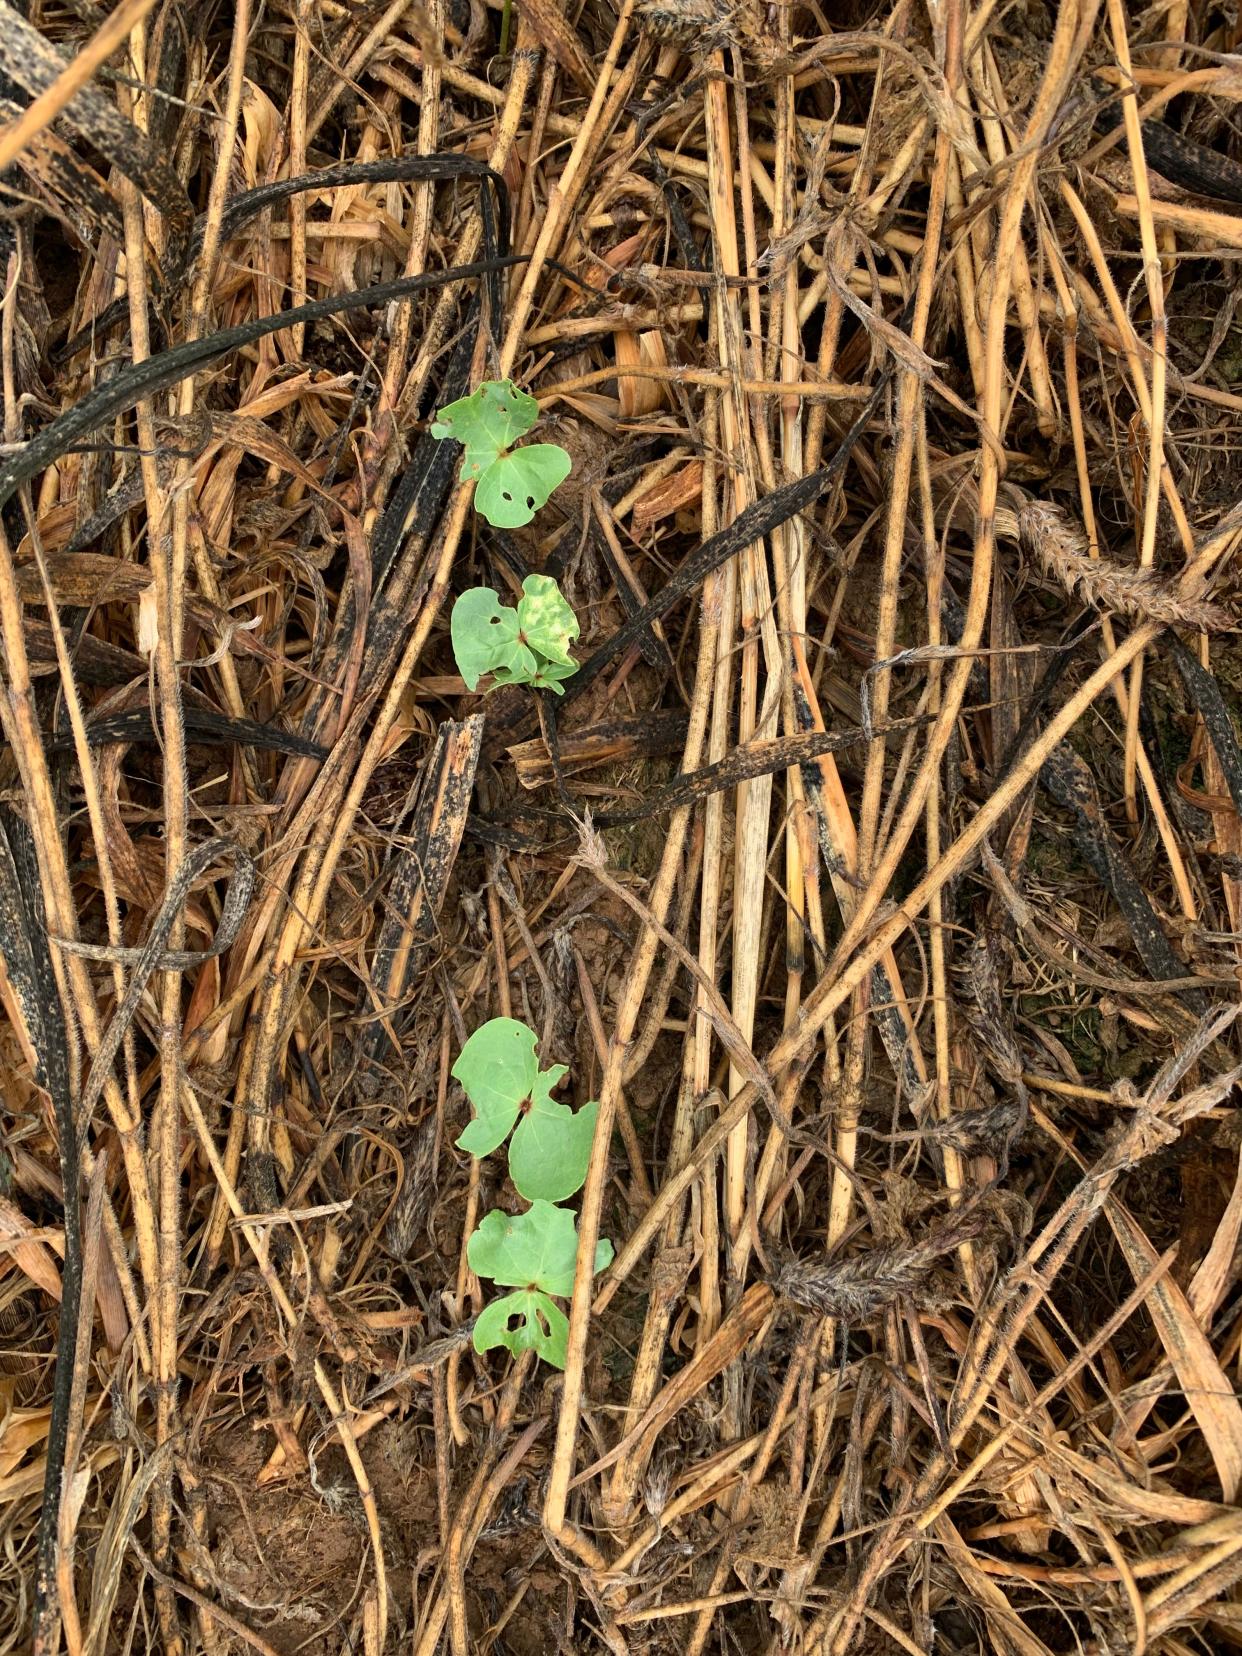 Cotton seedlings coming up in a field that had been planted with rye as a cover crop near Courtland, Alabama.